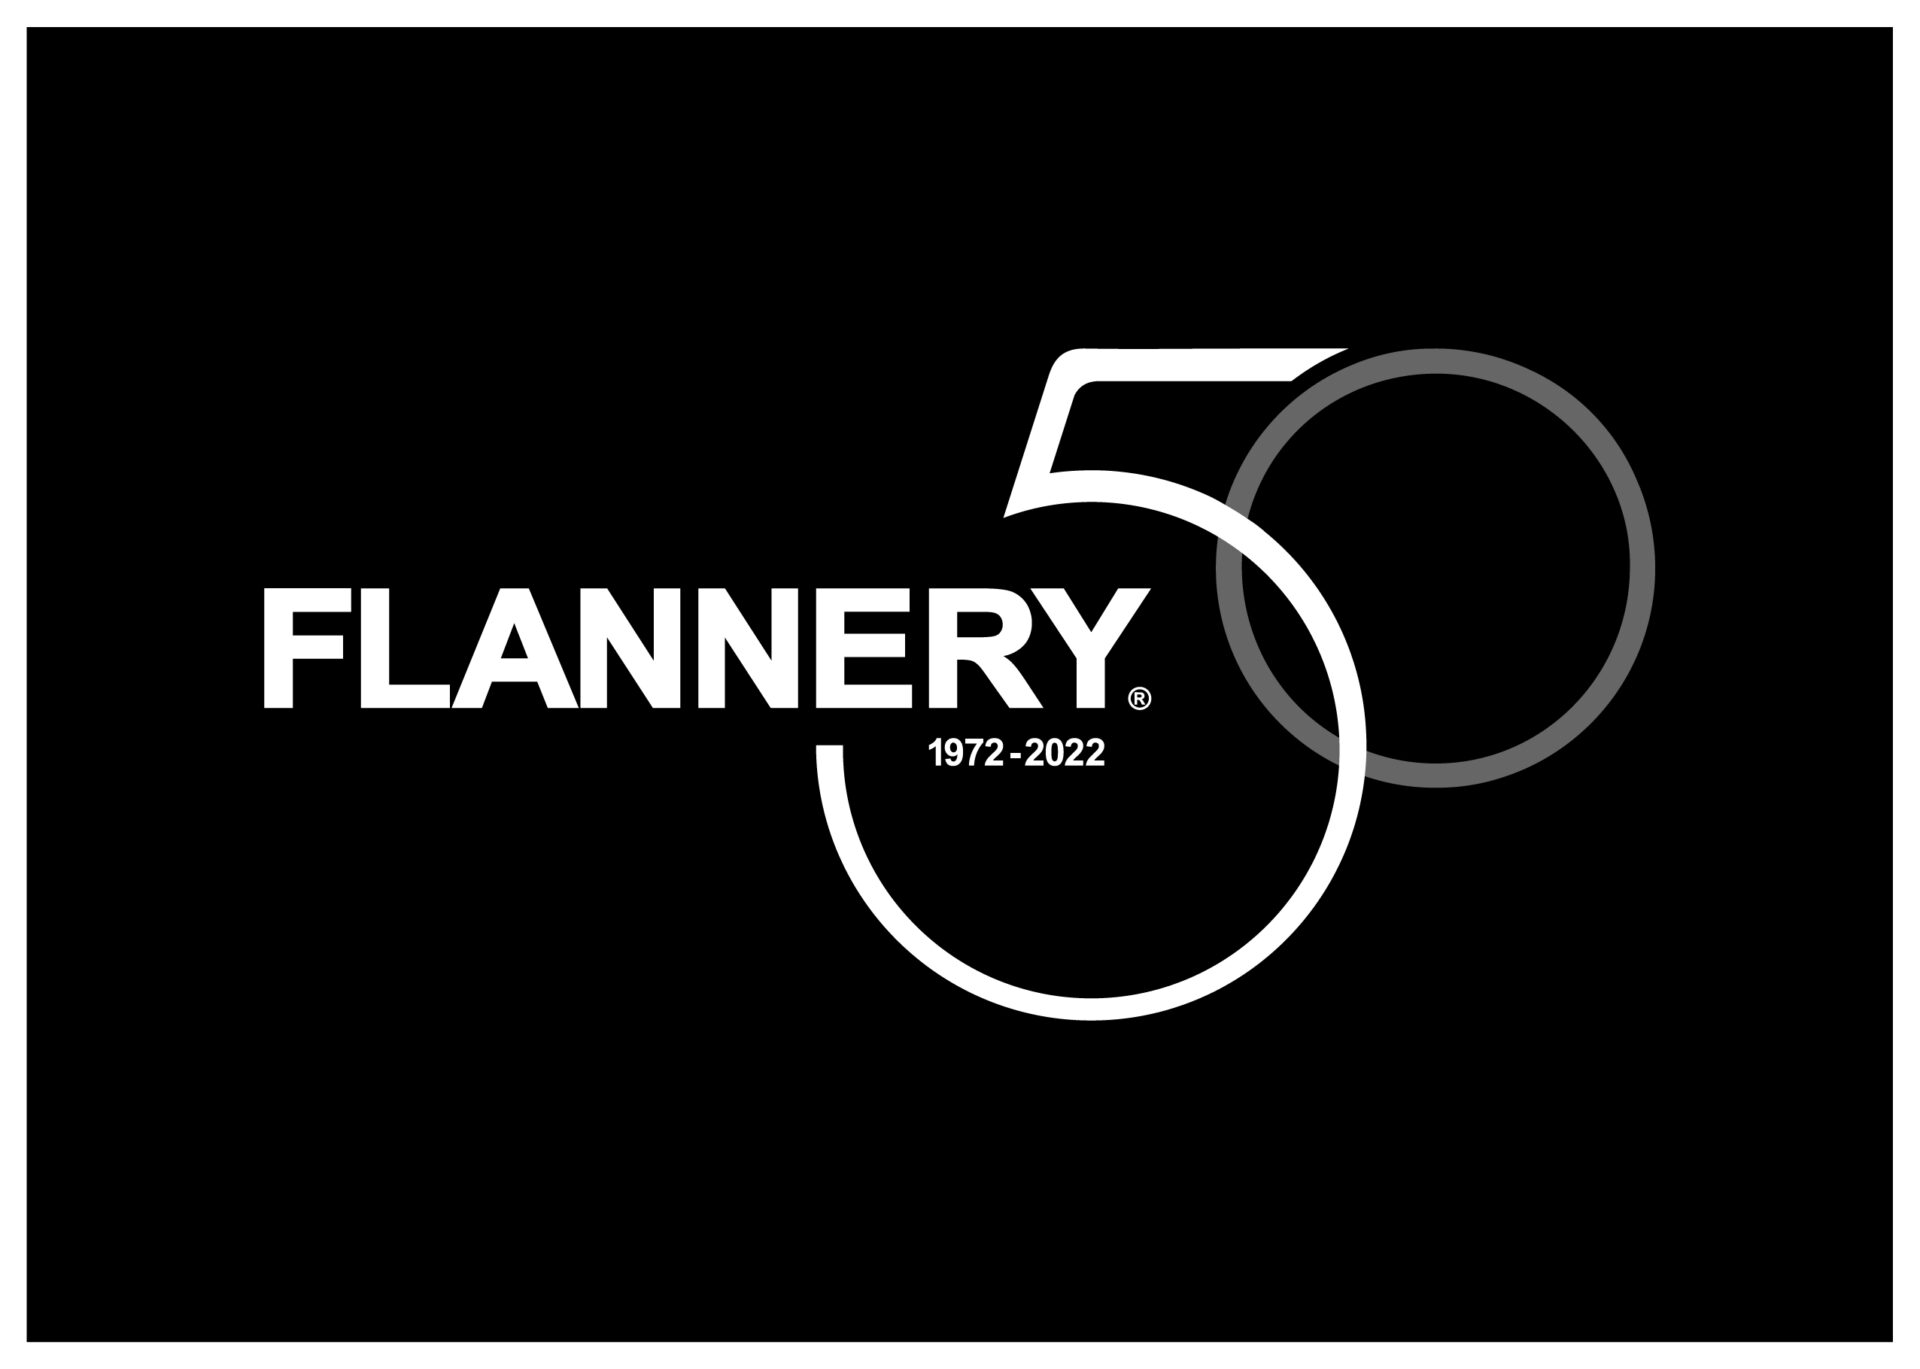 Flannery Plant Hire